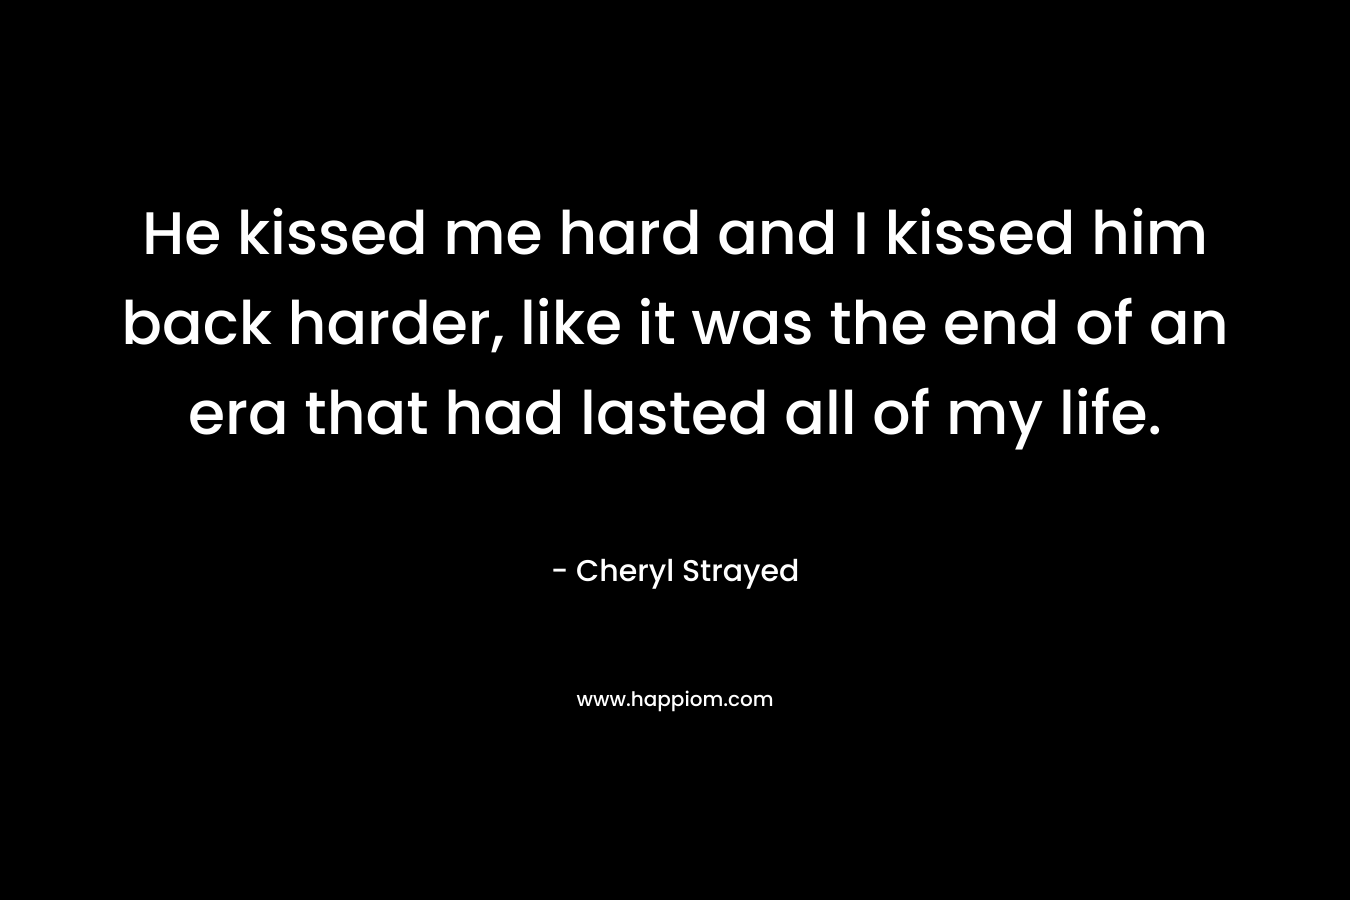 He kissed me hard and I kissed him back harder, like it was the end of an era that had lasted all of my life.